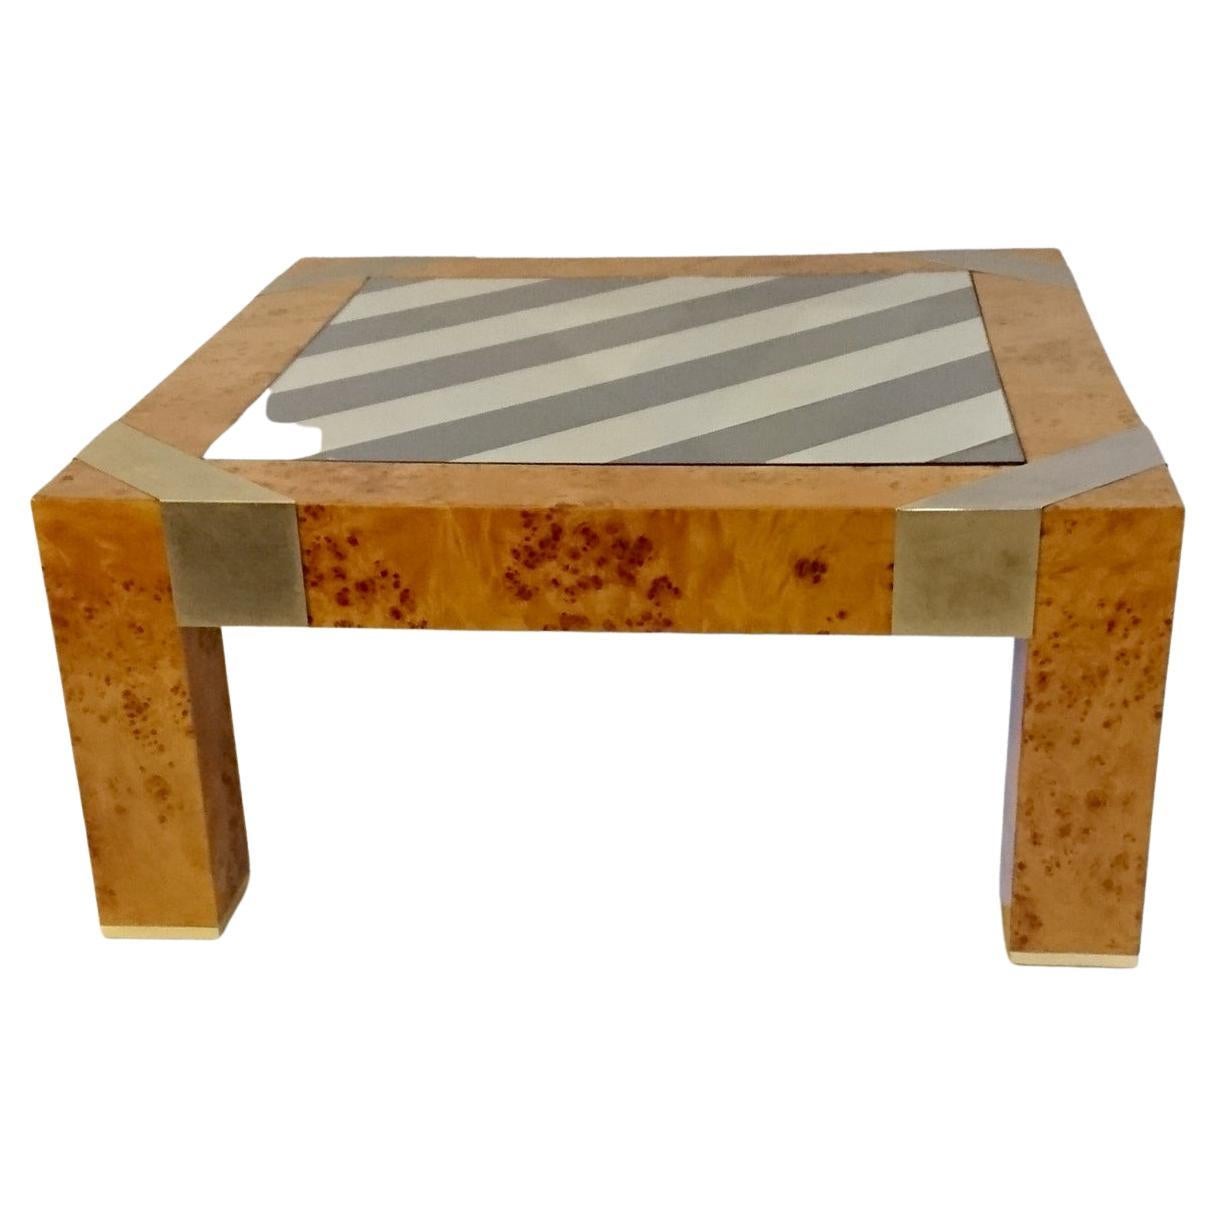 Italian coffee table in burl veneer with a diagonally striped glass top in gray. Details in metal on the corners as well as on bottom of the legs.